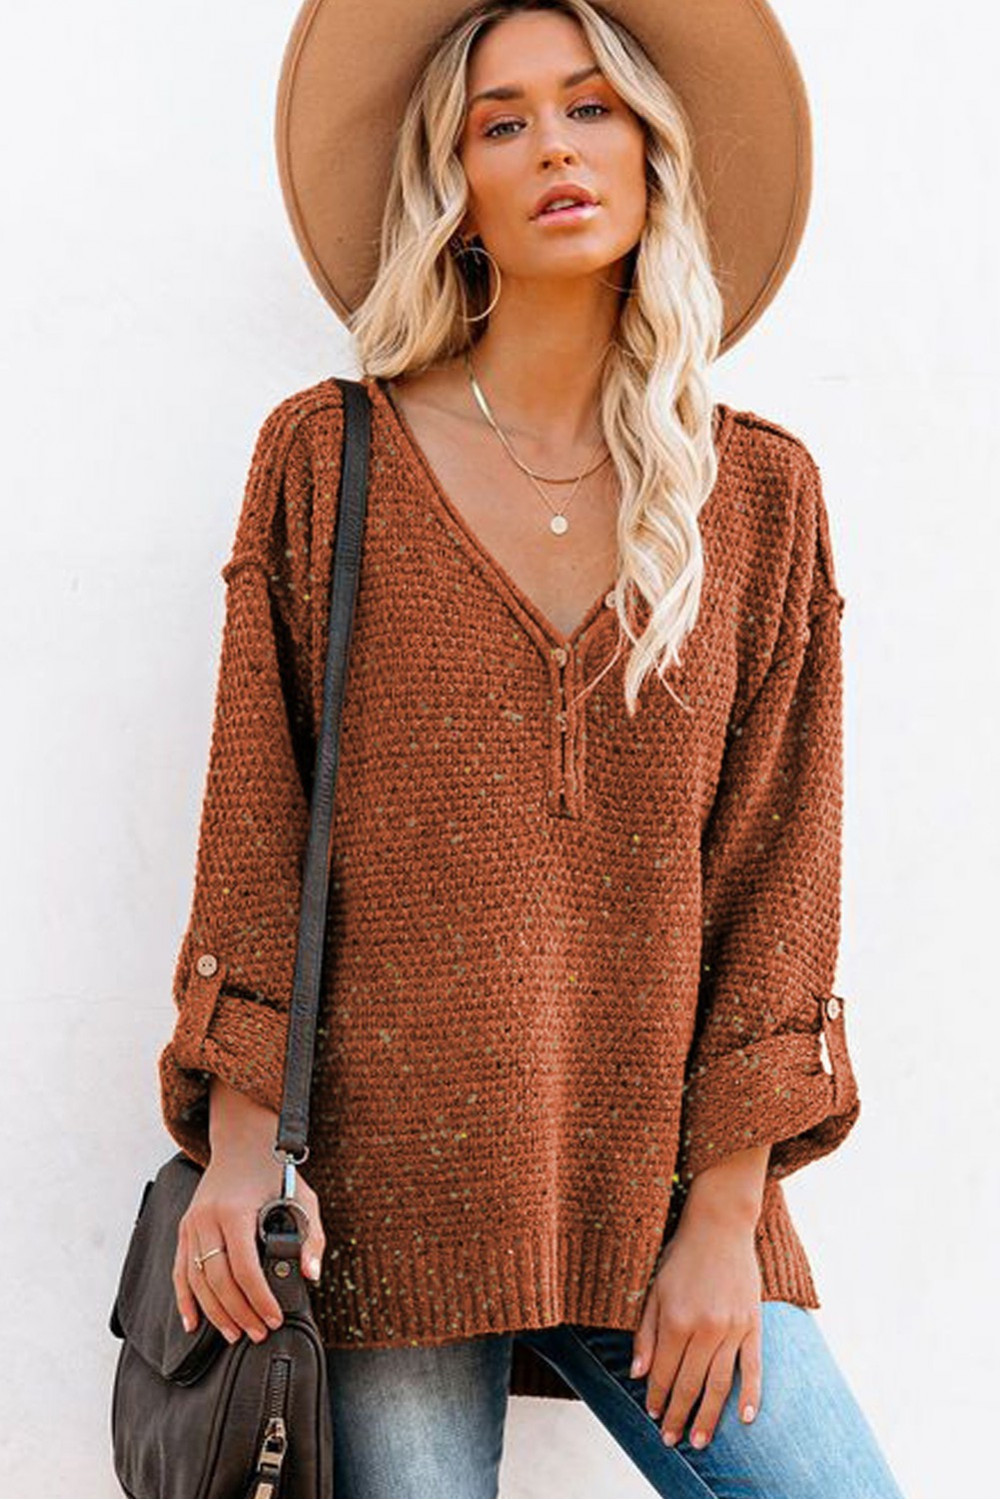 Brown knitted sweater with dropped shoulders